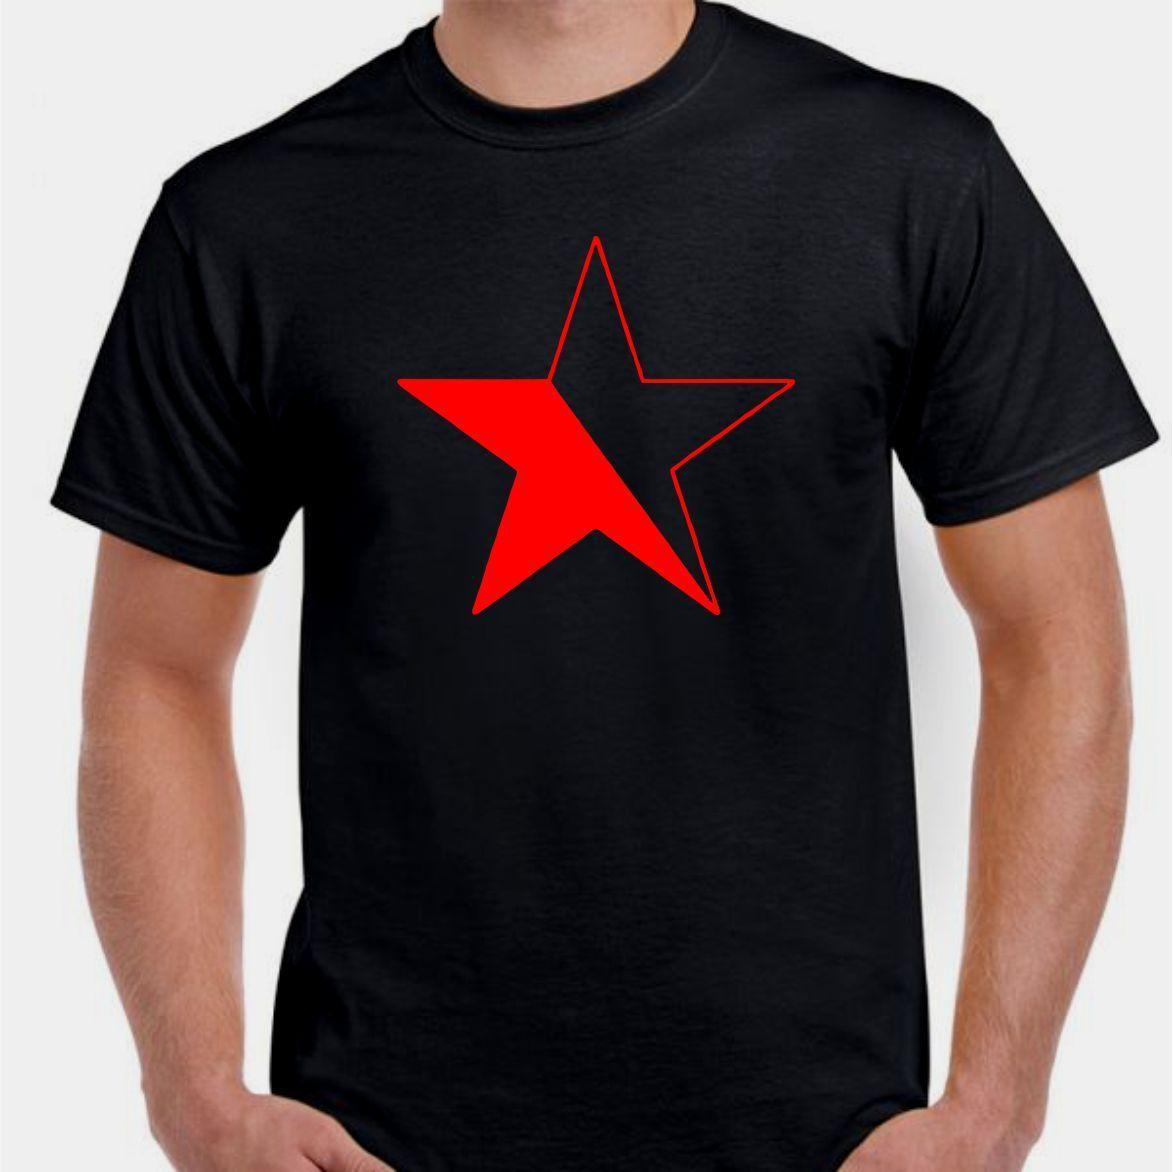 Red Star and the Letter T with a Logo - Anarchy Anarcho Communism Red Star Revolt Revolution T Shirt 100